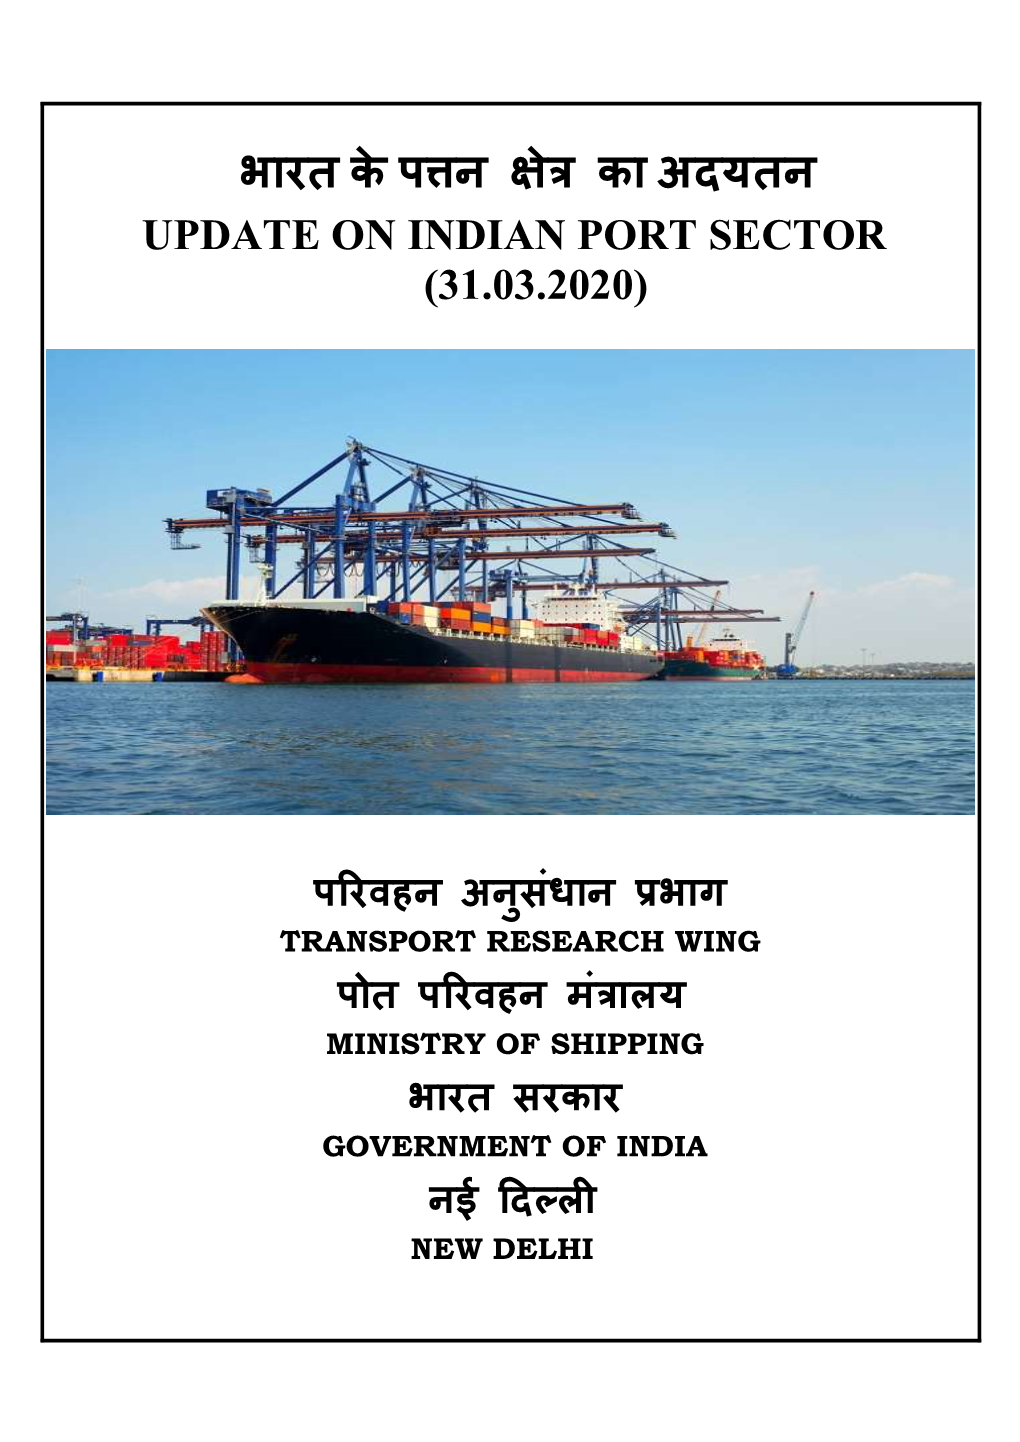 Update on Indian Port Sector up to 31.03.2020